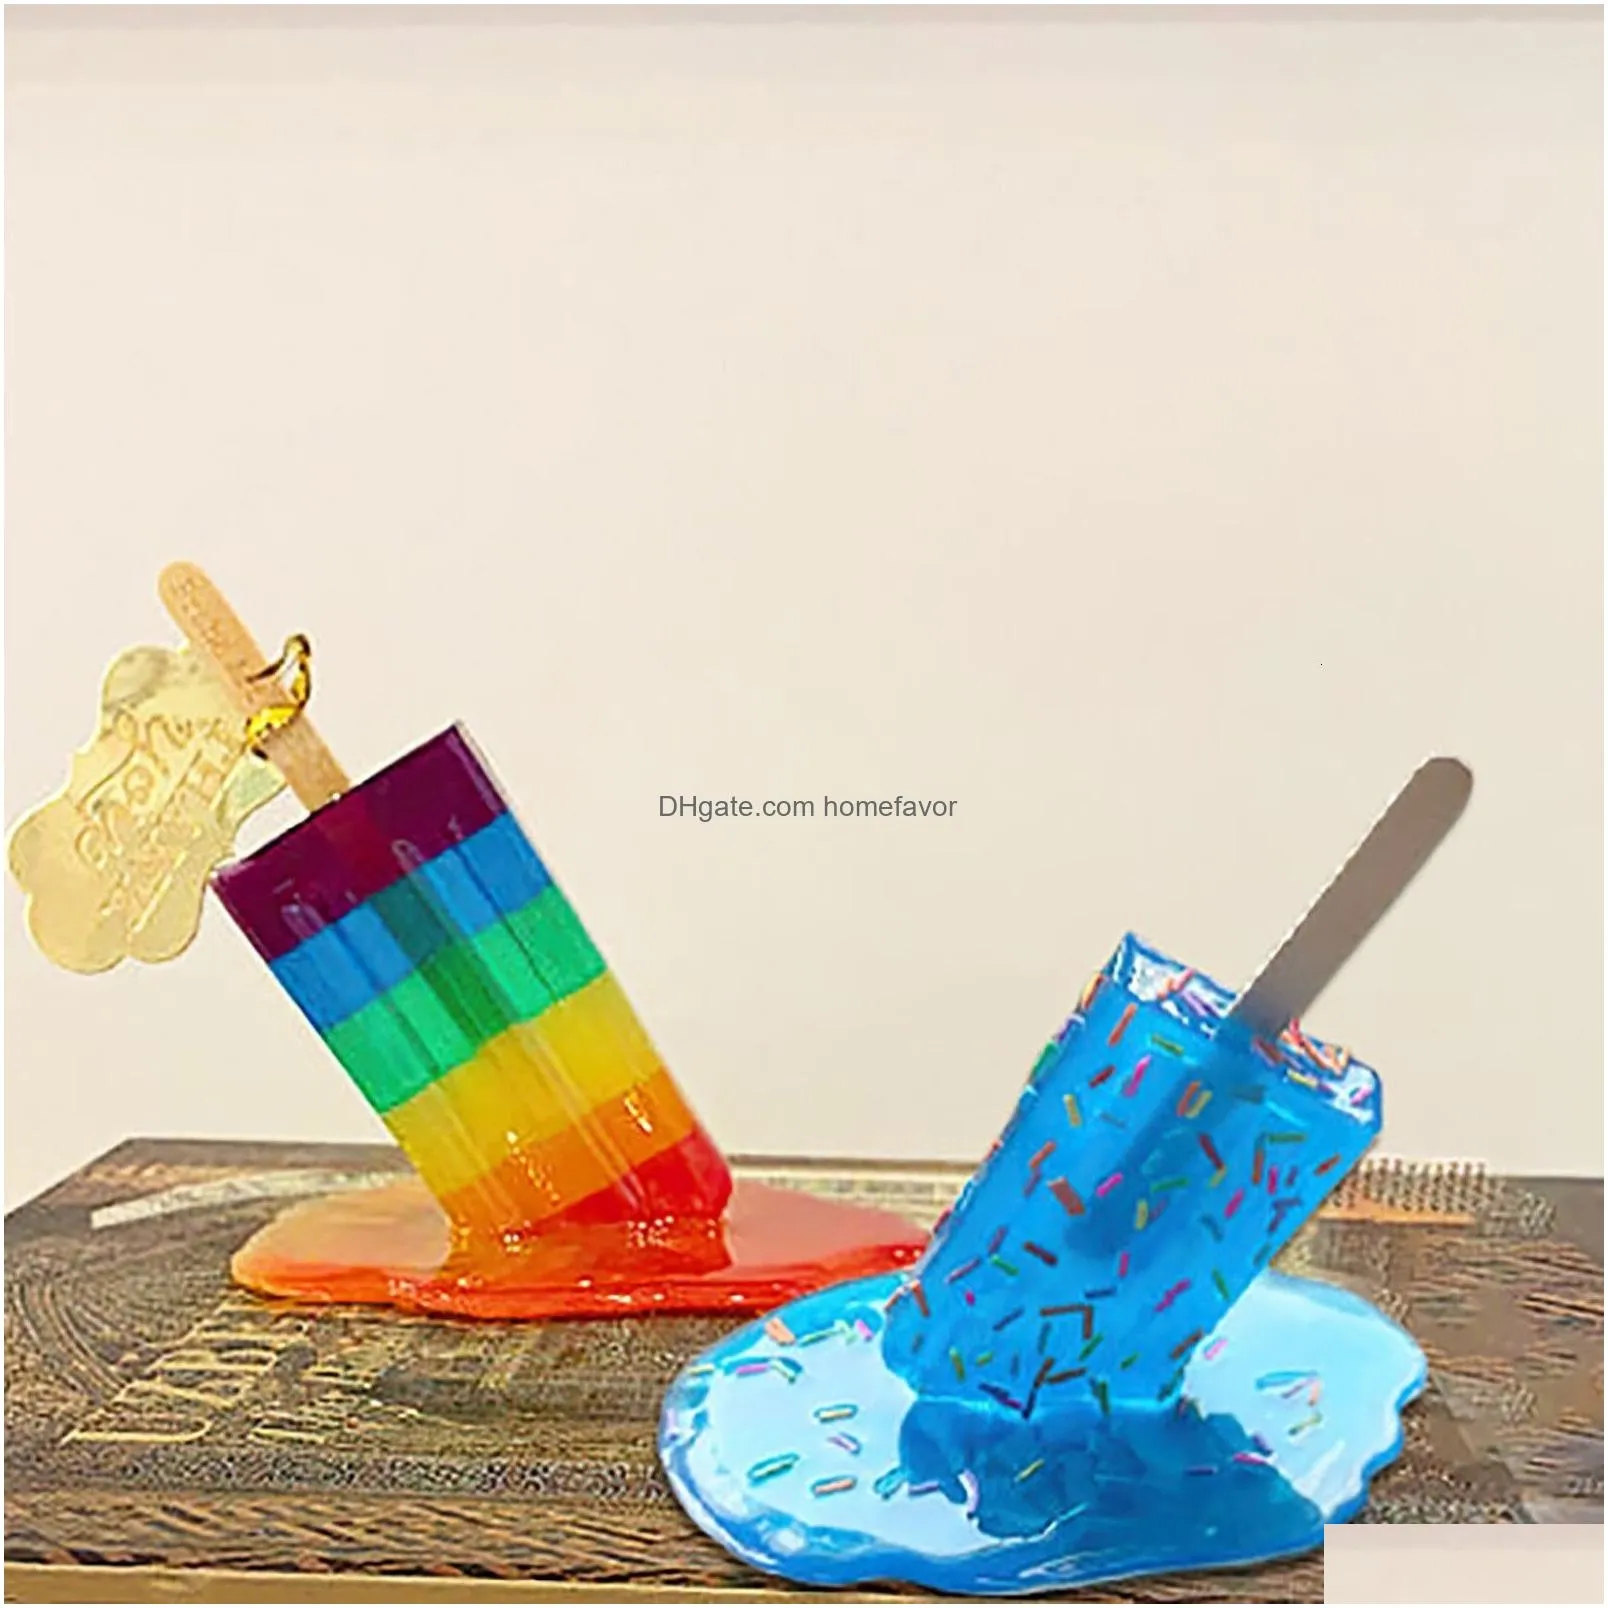 other event party supplies melting ice cream resin ornaments popsicle sculpture decoration craft art figure housewarming gifts home decor